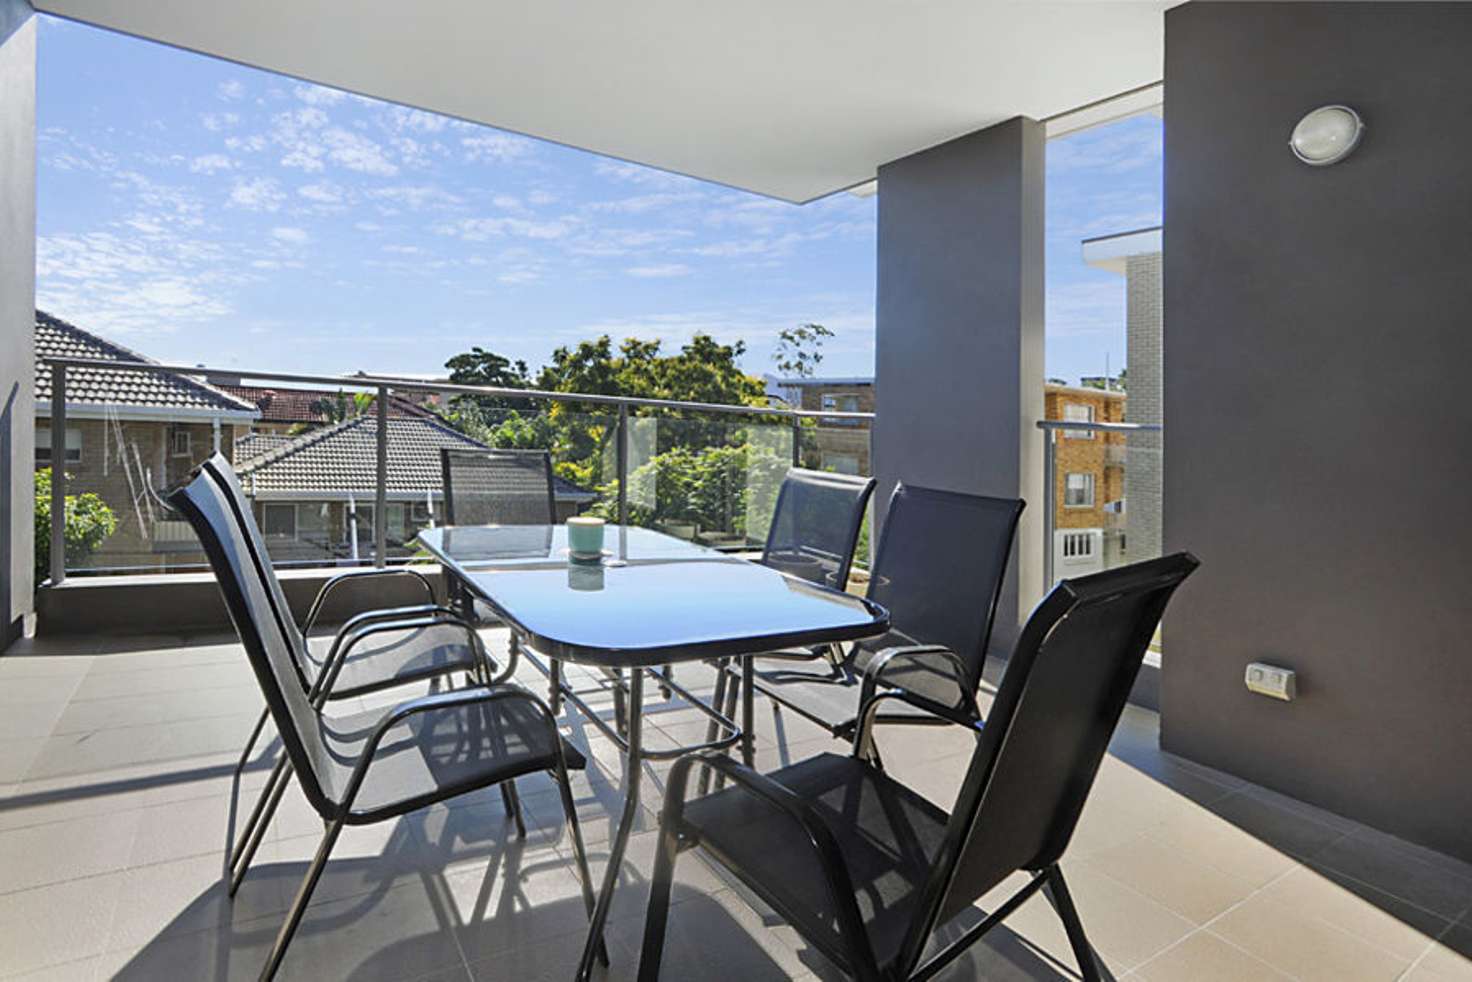 Main view of Homely apartment listing, 11/57 Gordon St, Greenslopes QLD 4120